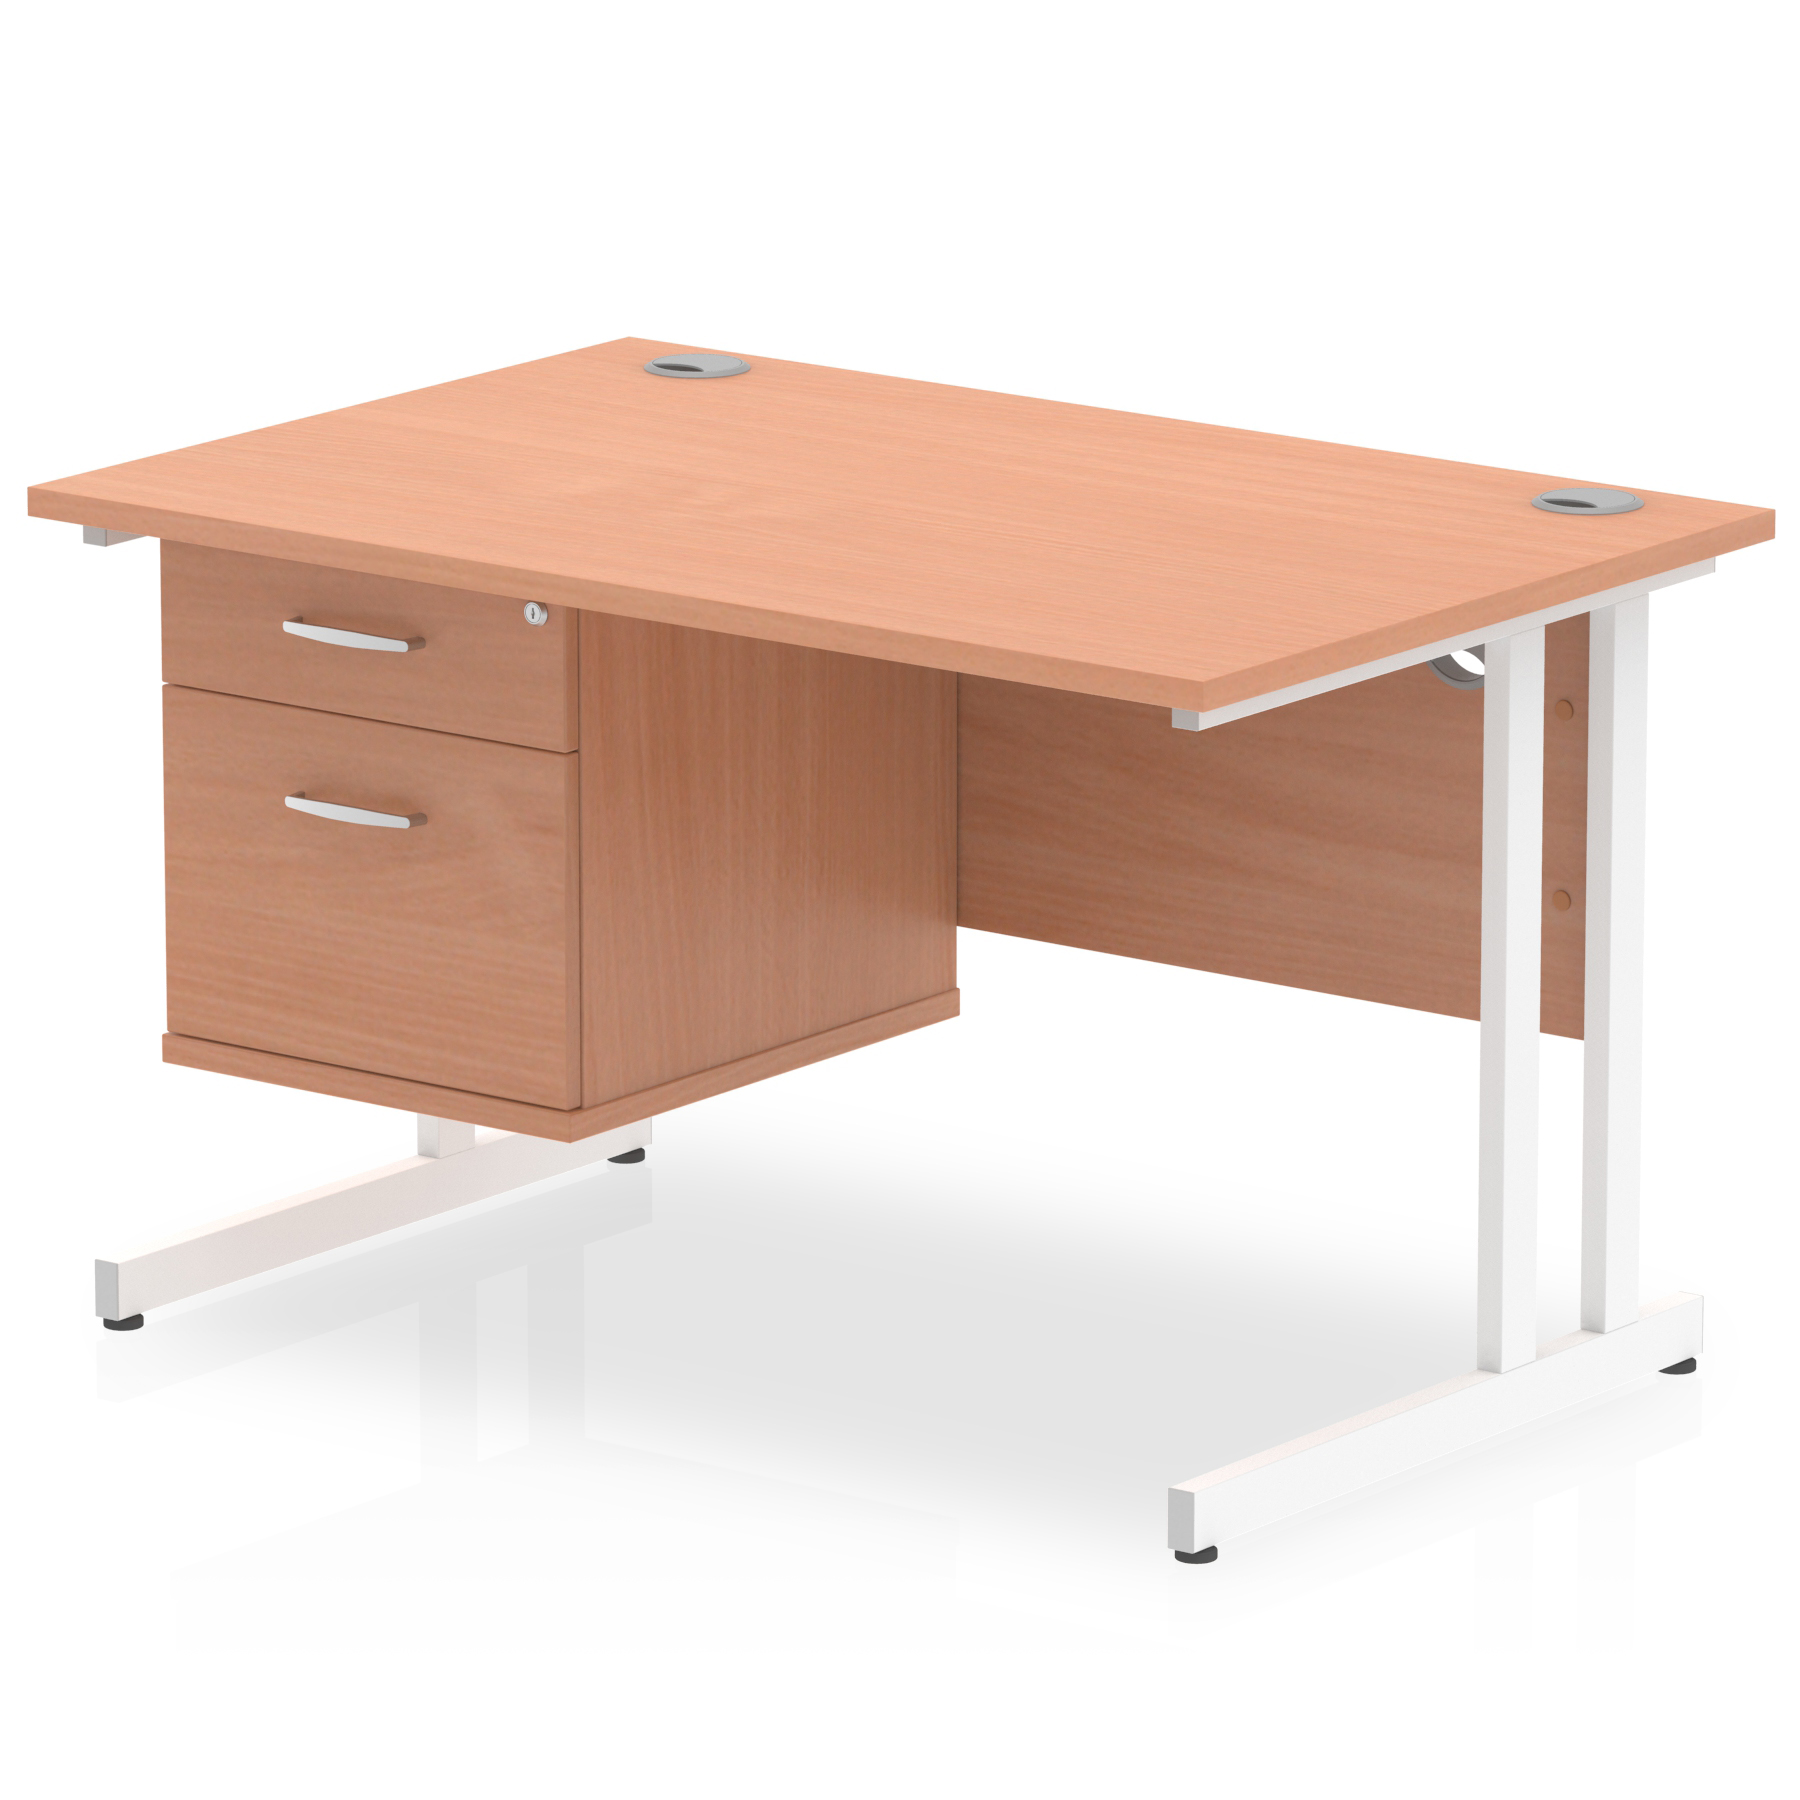 Impulse 1200 x 800mm Straight Desk Beech Top White Cantilever Leg with 1 x 2 Drawer Fixed Pedestal